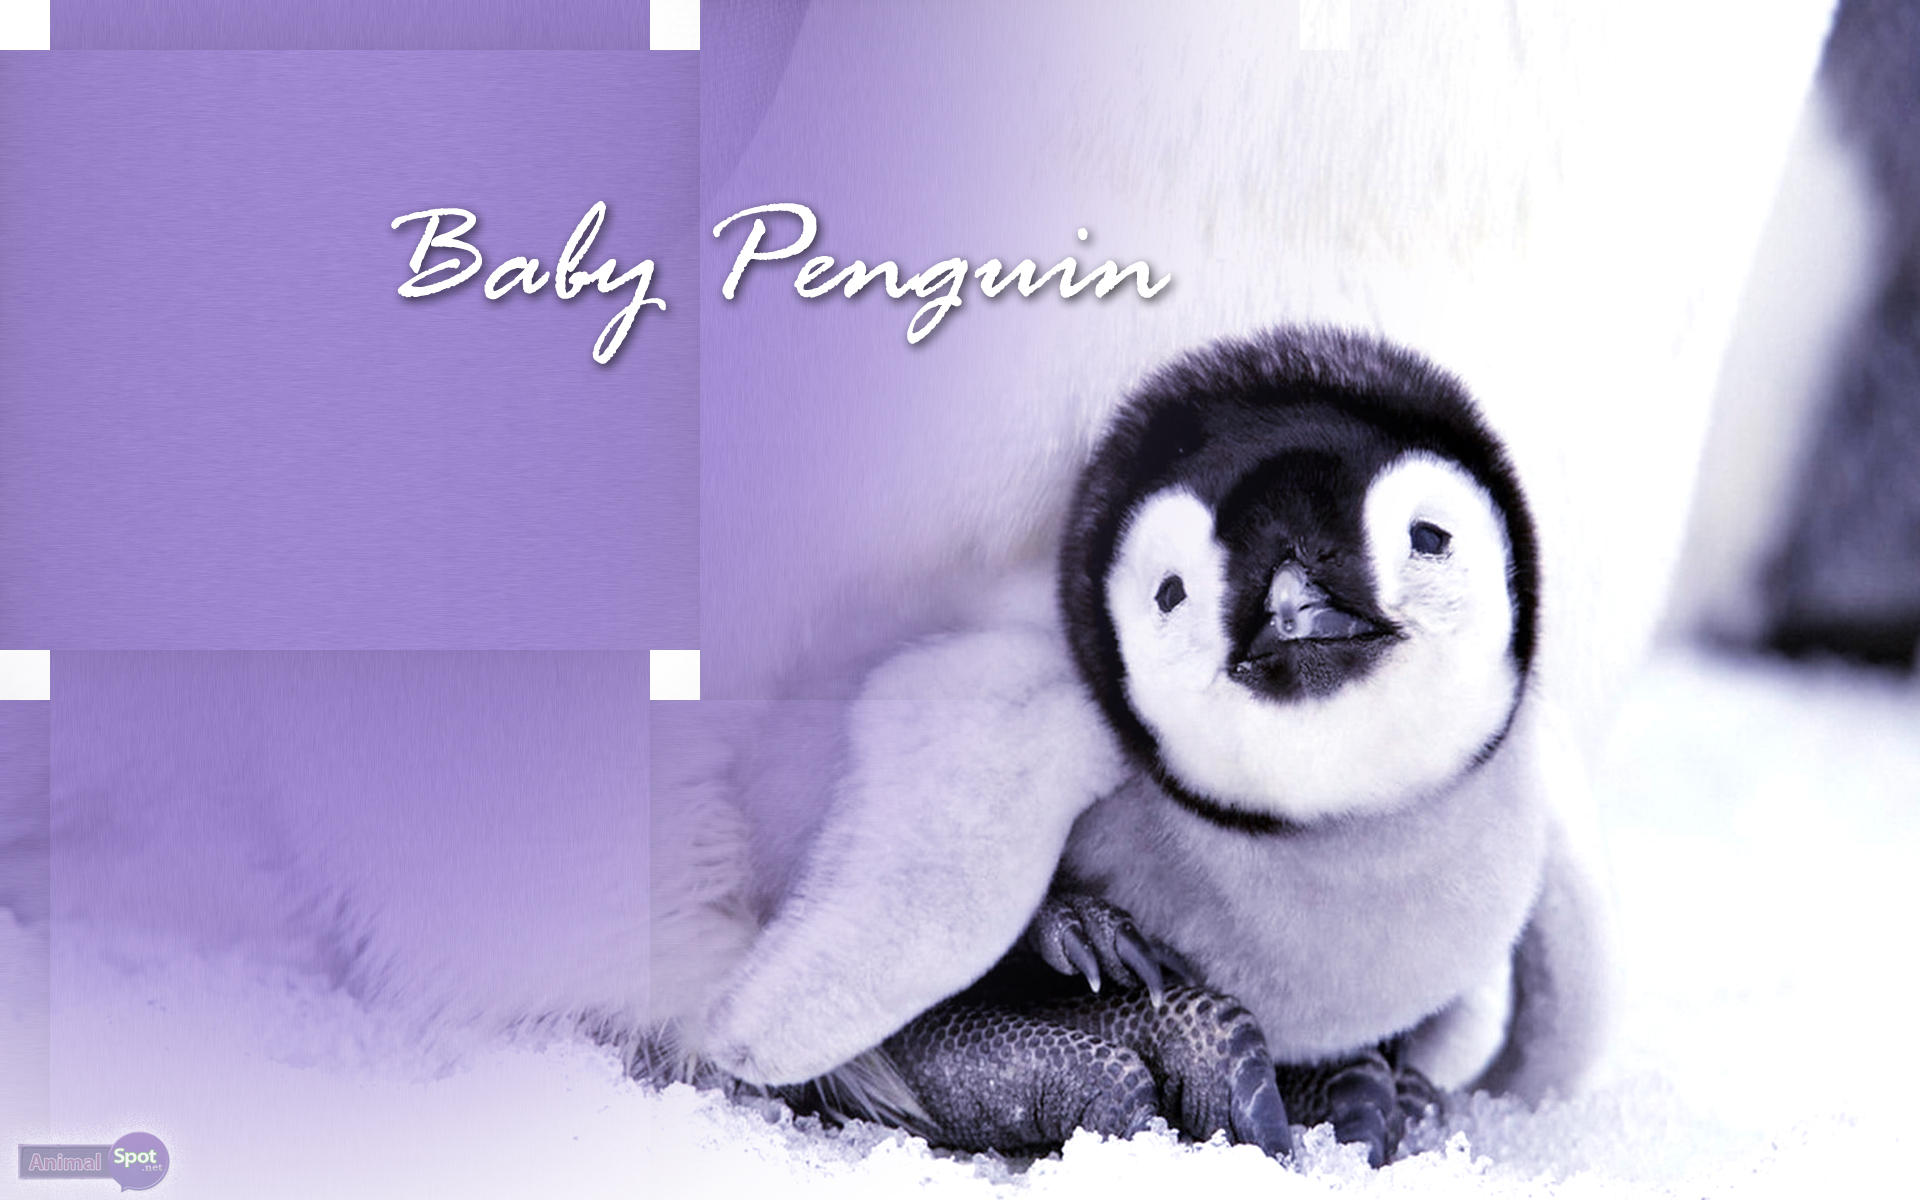 Free download Iphone Wallpapers Cute Baby Penguin photos Design Your Cute  Wallpapers 640x960 for your Desktop Mobile  Tablet  Explore 46 Baby  Penguin Desktop Wallpaper  Cute Penguin Backgrounds Penguin Wallpaper